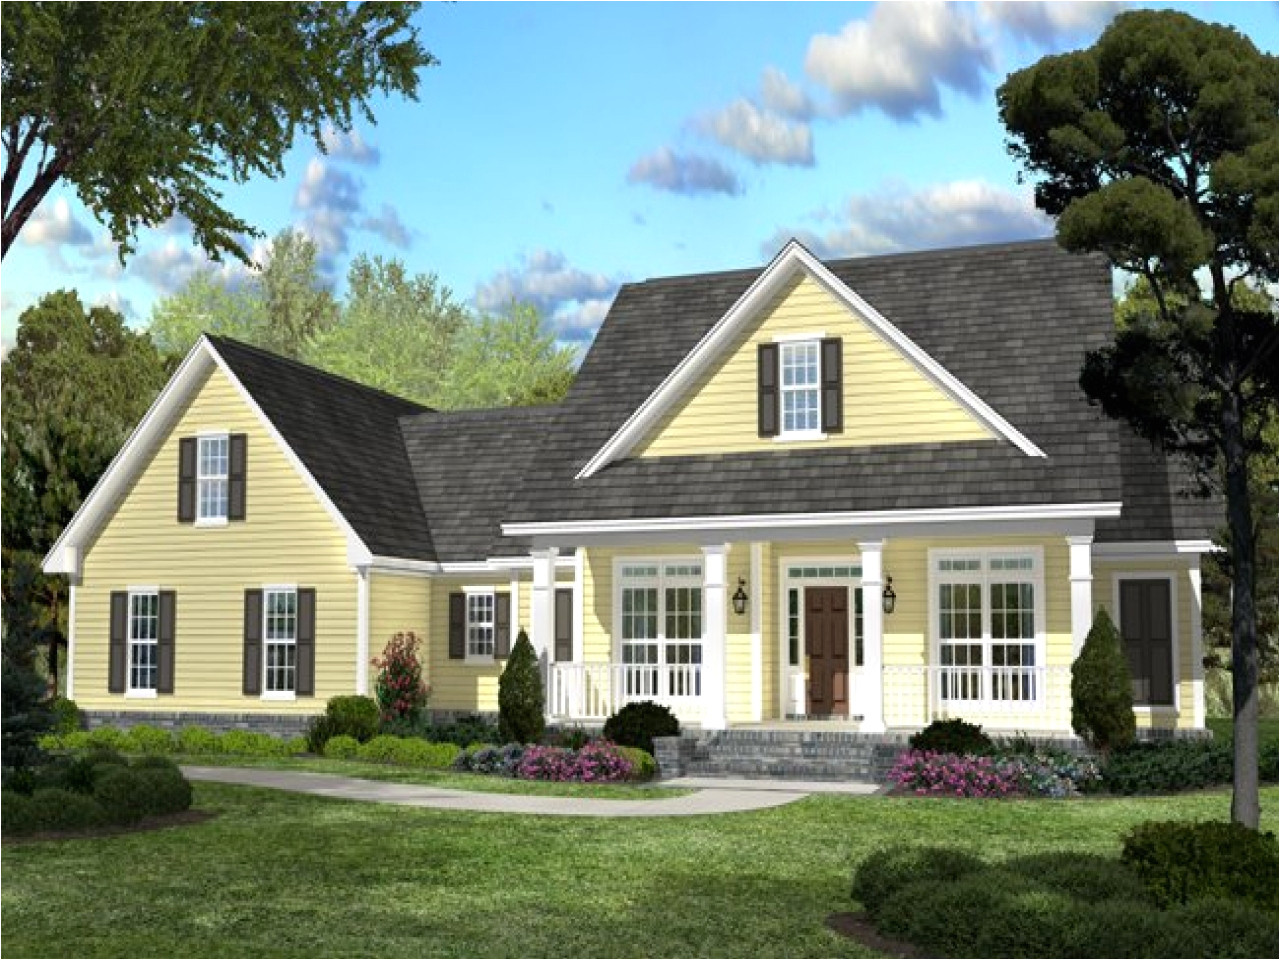 southern living house plans detached garage fresh southern living house plans with detached garage house decorations